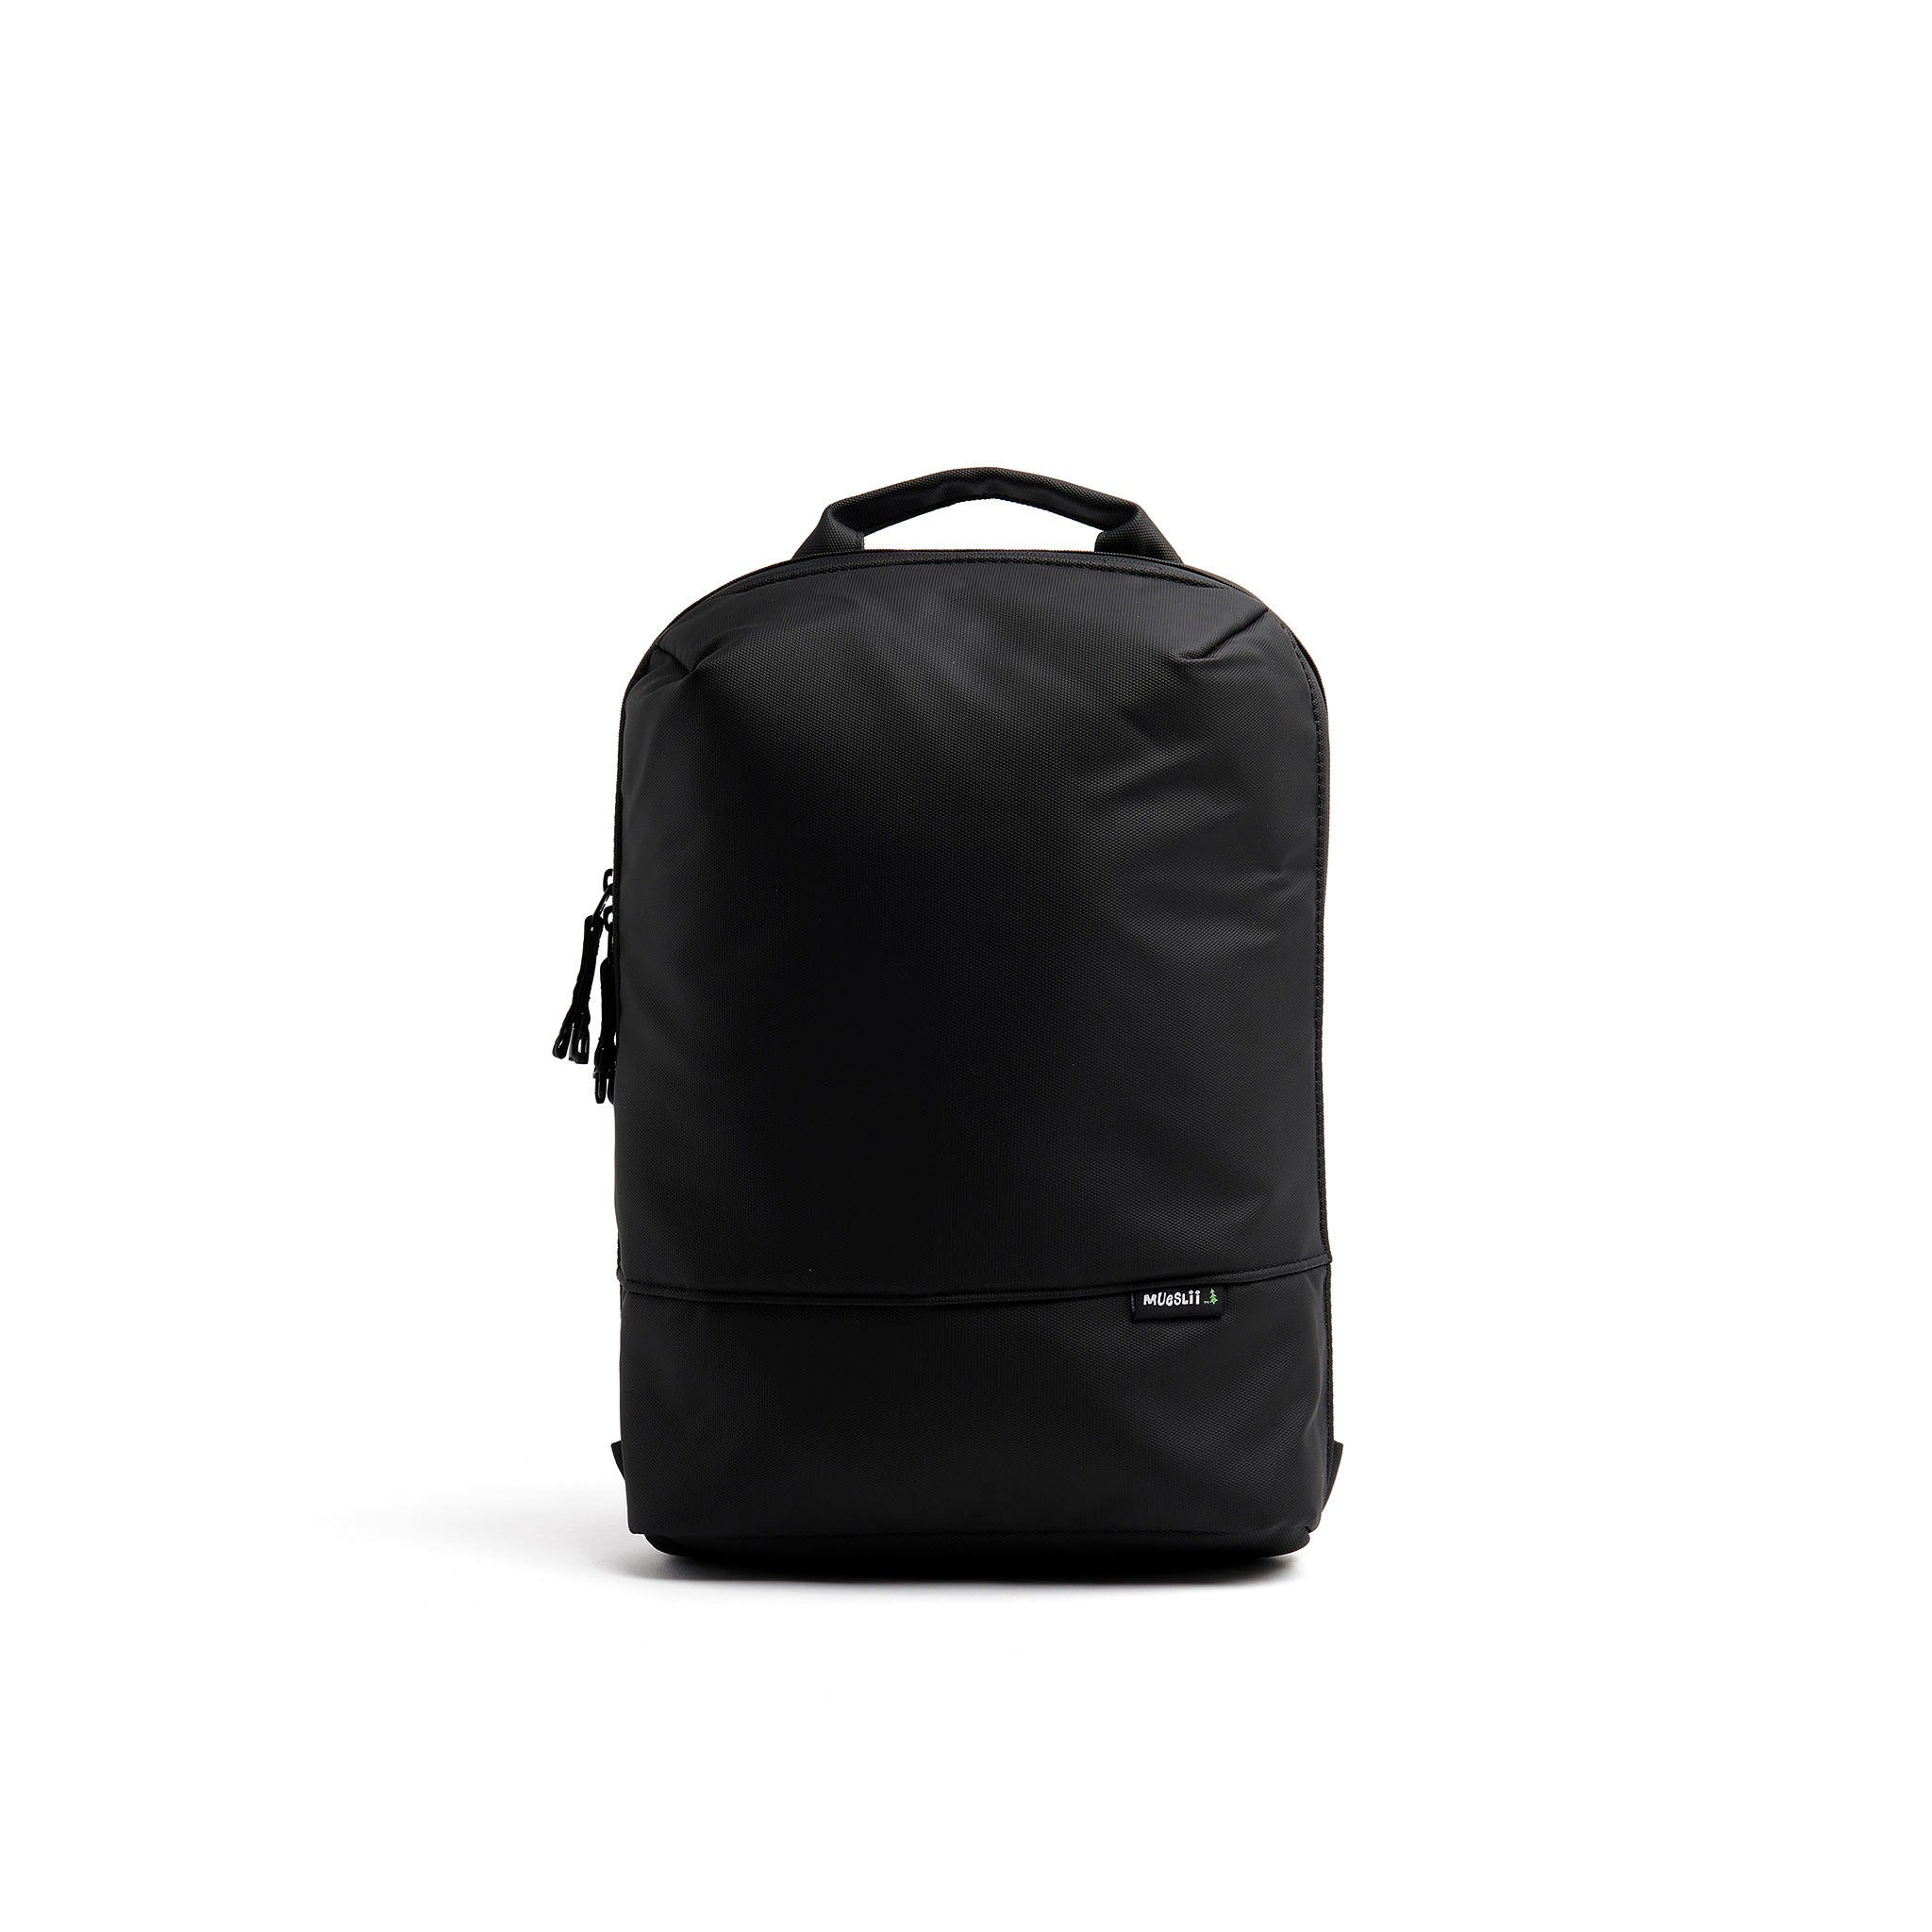 Mueslii small backpack, made of PU coated waterproof nylon, with a laptop compartment, color coal black, front view.